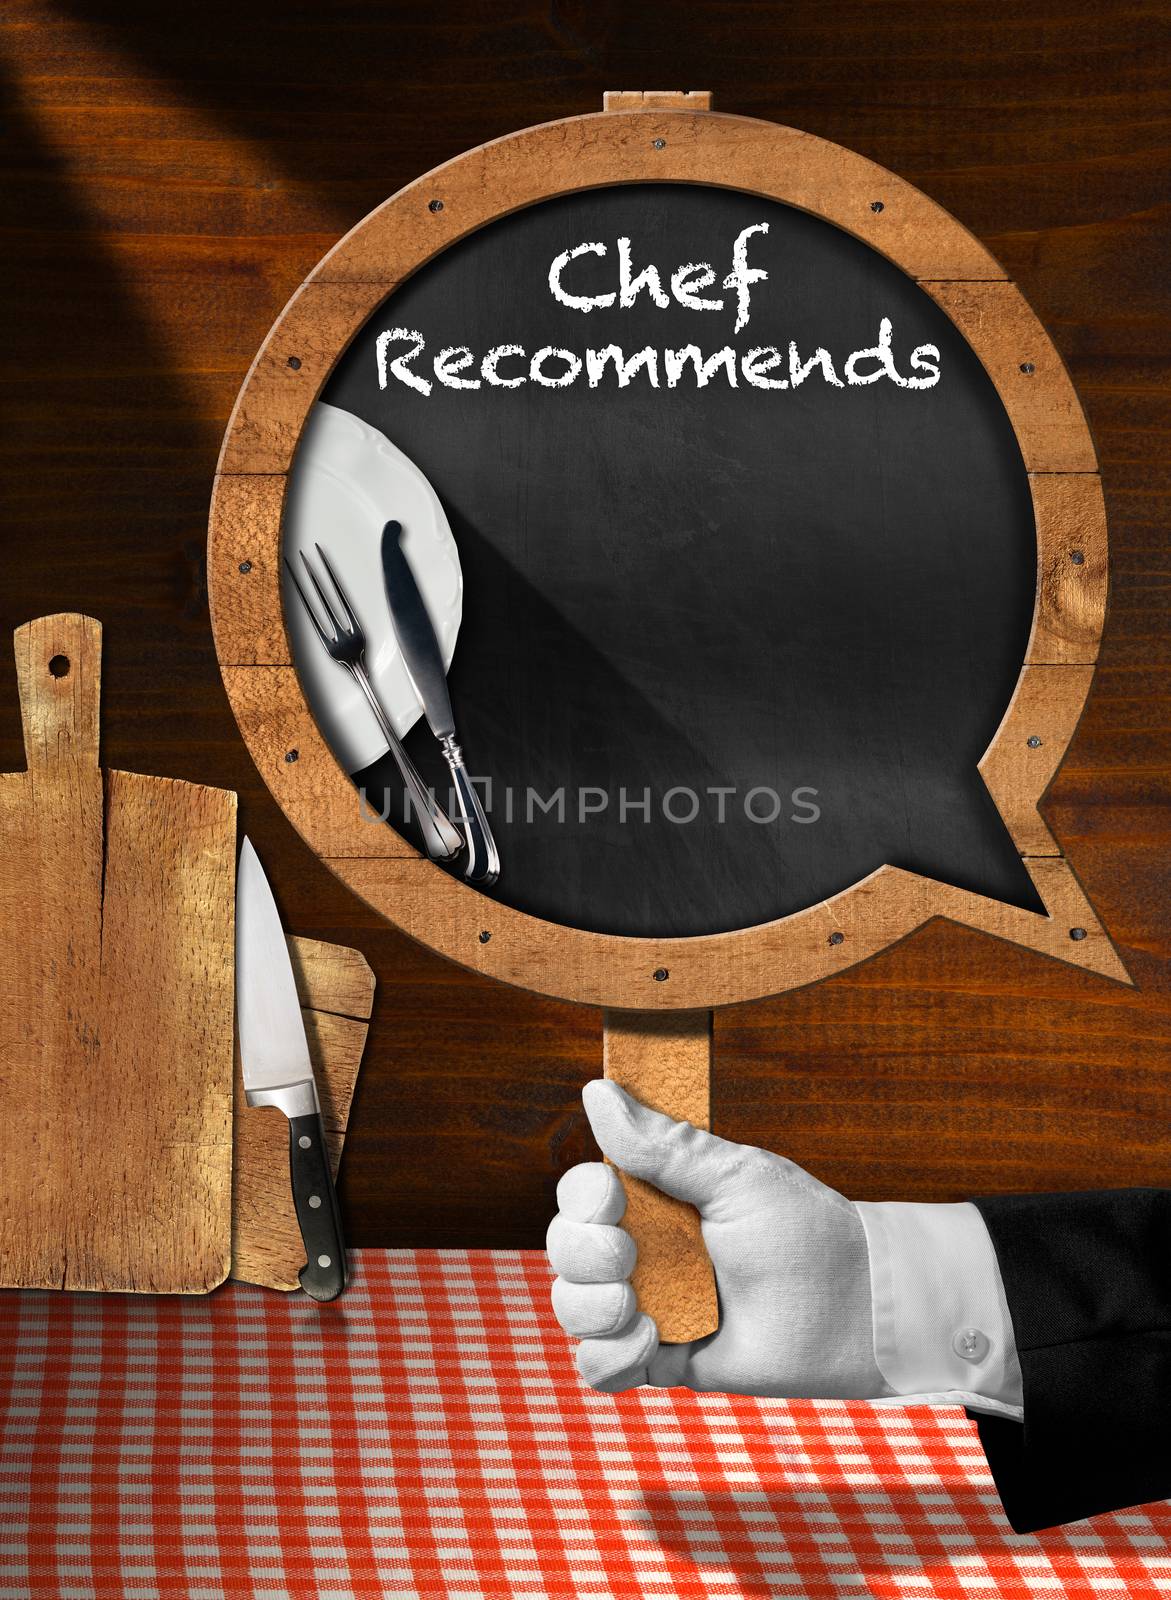 Chef Recommends - Empty Blackboard by catalby